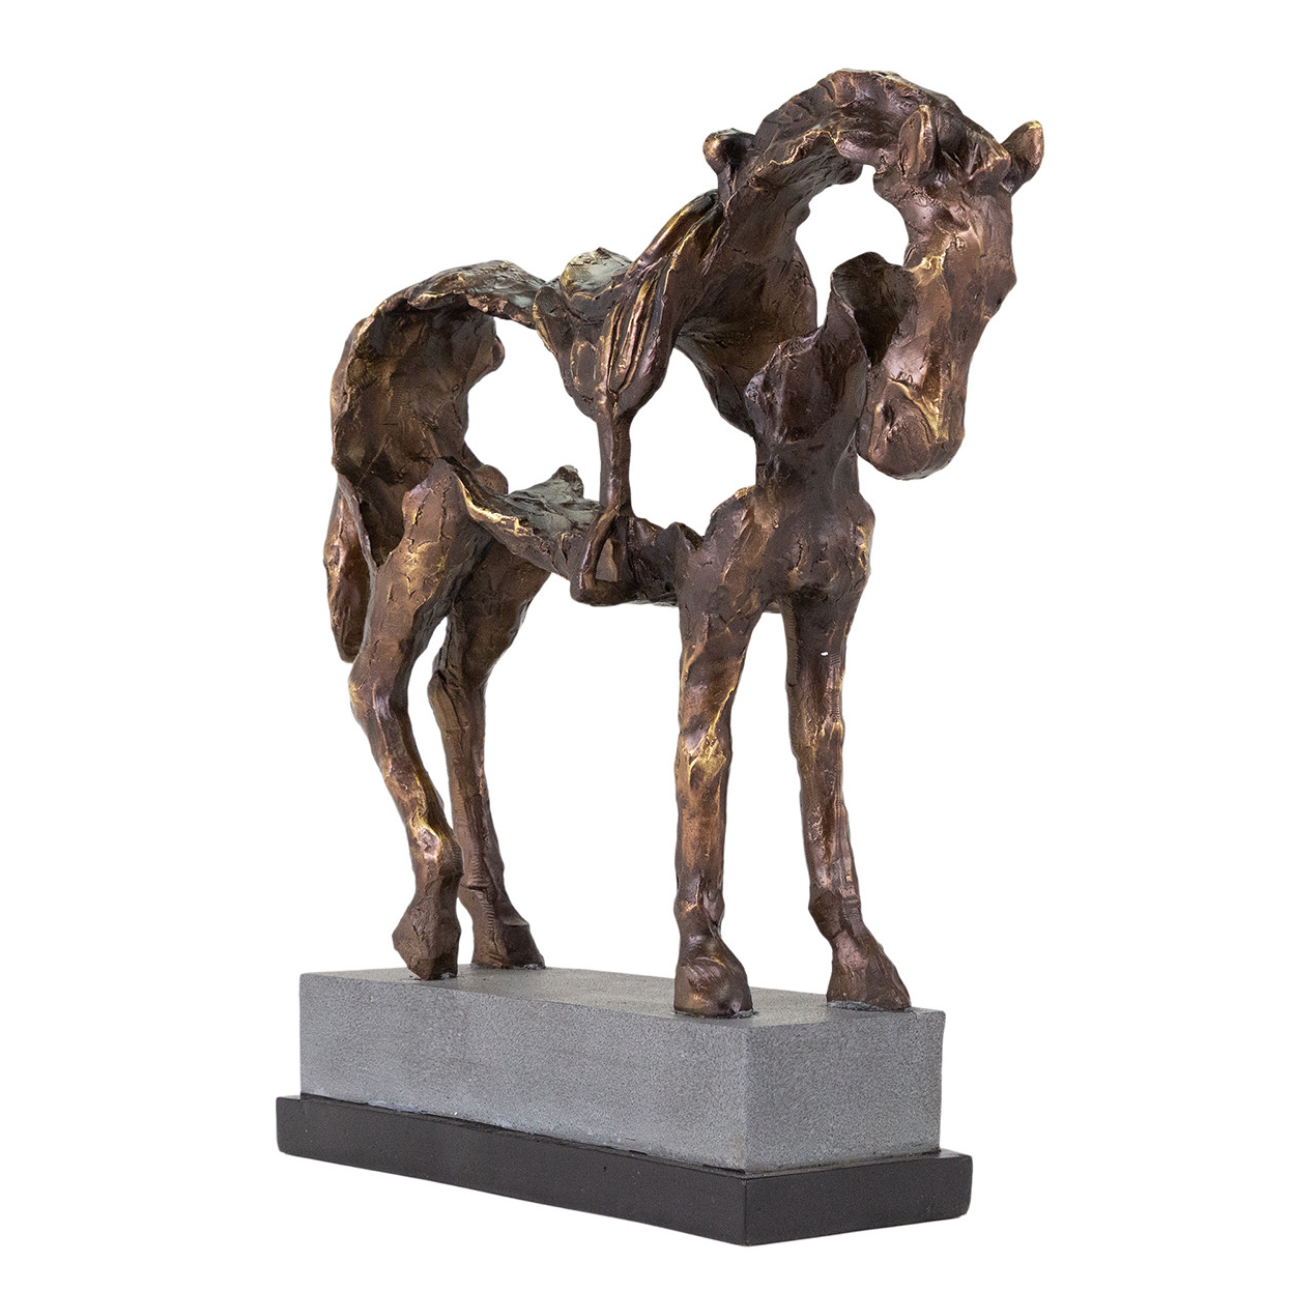 Bronze sculpture of a conjoined twin horse with two heads, four front legs, and two rear legs, mounted on a gray stone base in Scottsdale, Arizona by The Import Collection, isolated on a white background.